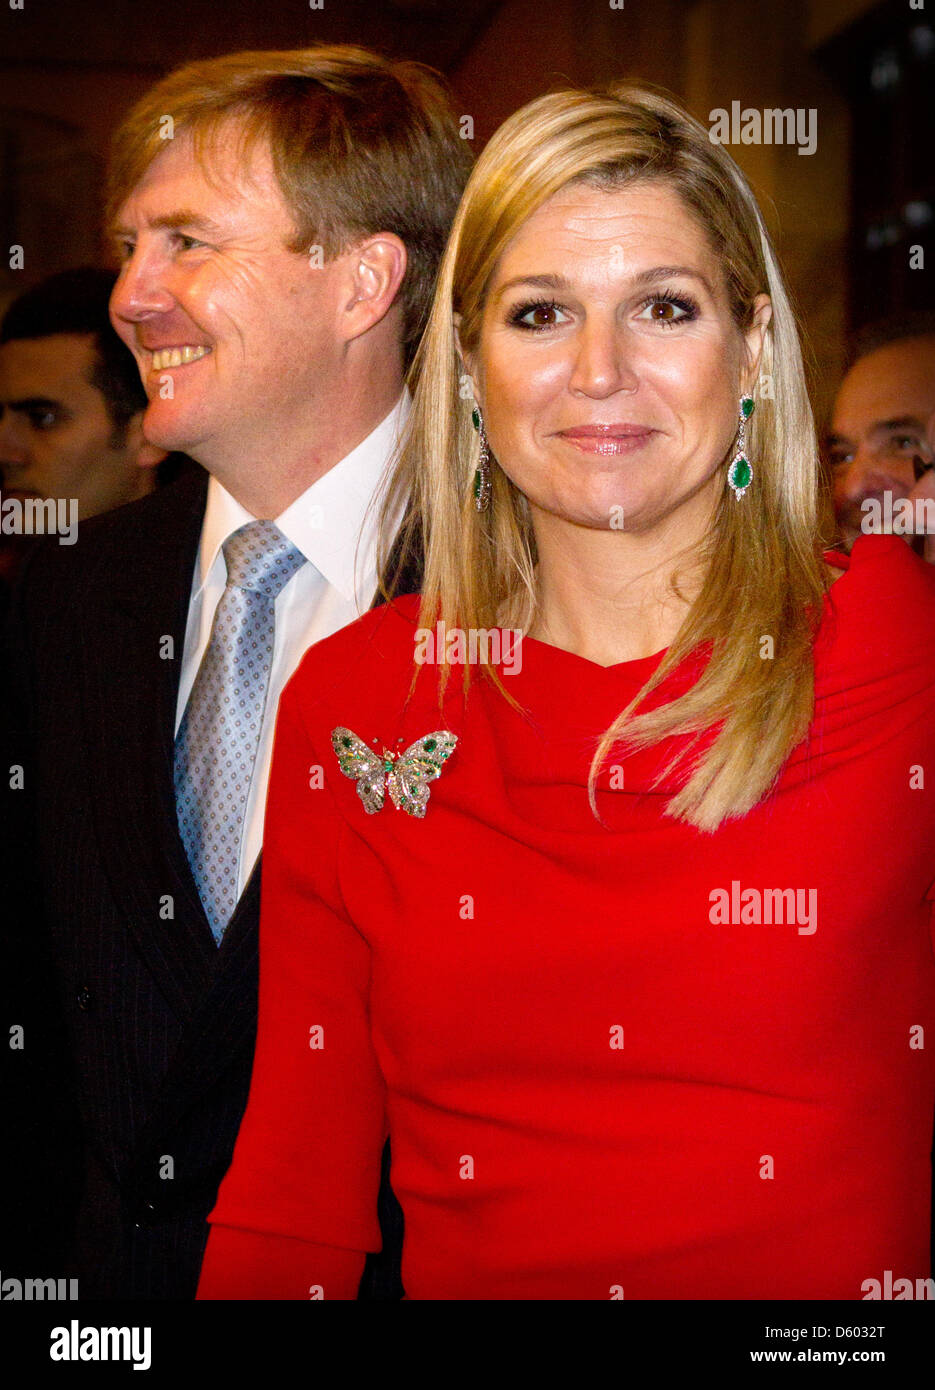 Prince Willem-Alexander and Princess Maxima of The Netherlands attend a concert of the concertgebouworkest at the Halic Centre Concert in Istanbul, Turkey, 10 November 2012. Photo: Patrick van Katwijk - NETHERLANDS OUT Stock Photo